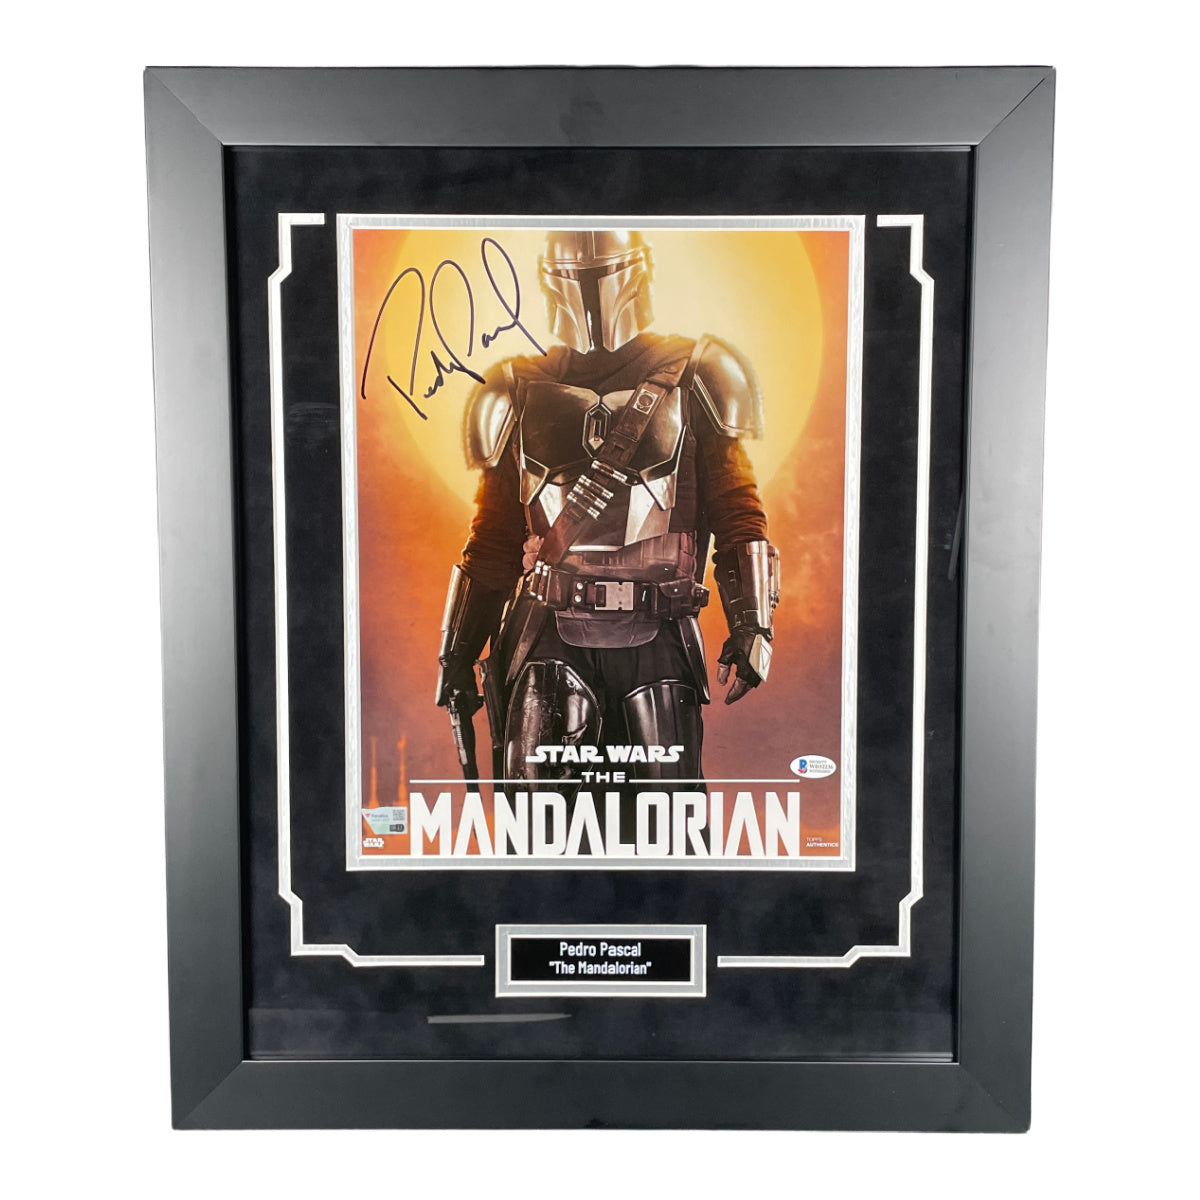 Pedro Pascal Signed 11x14 Photo Star Wars The Mandalorian Framed Autographed BAS